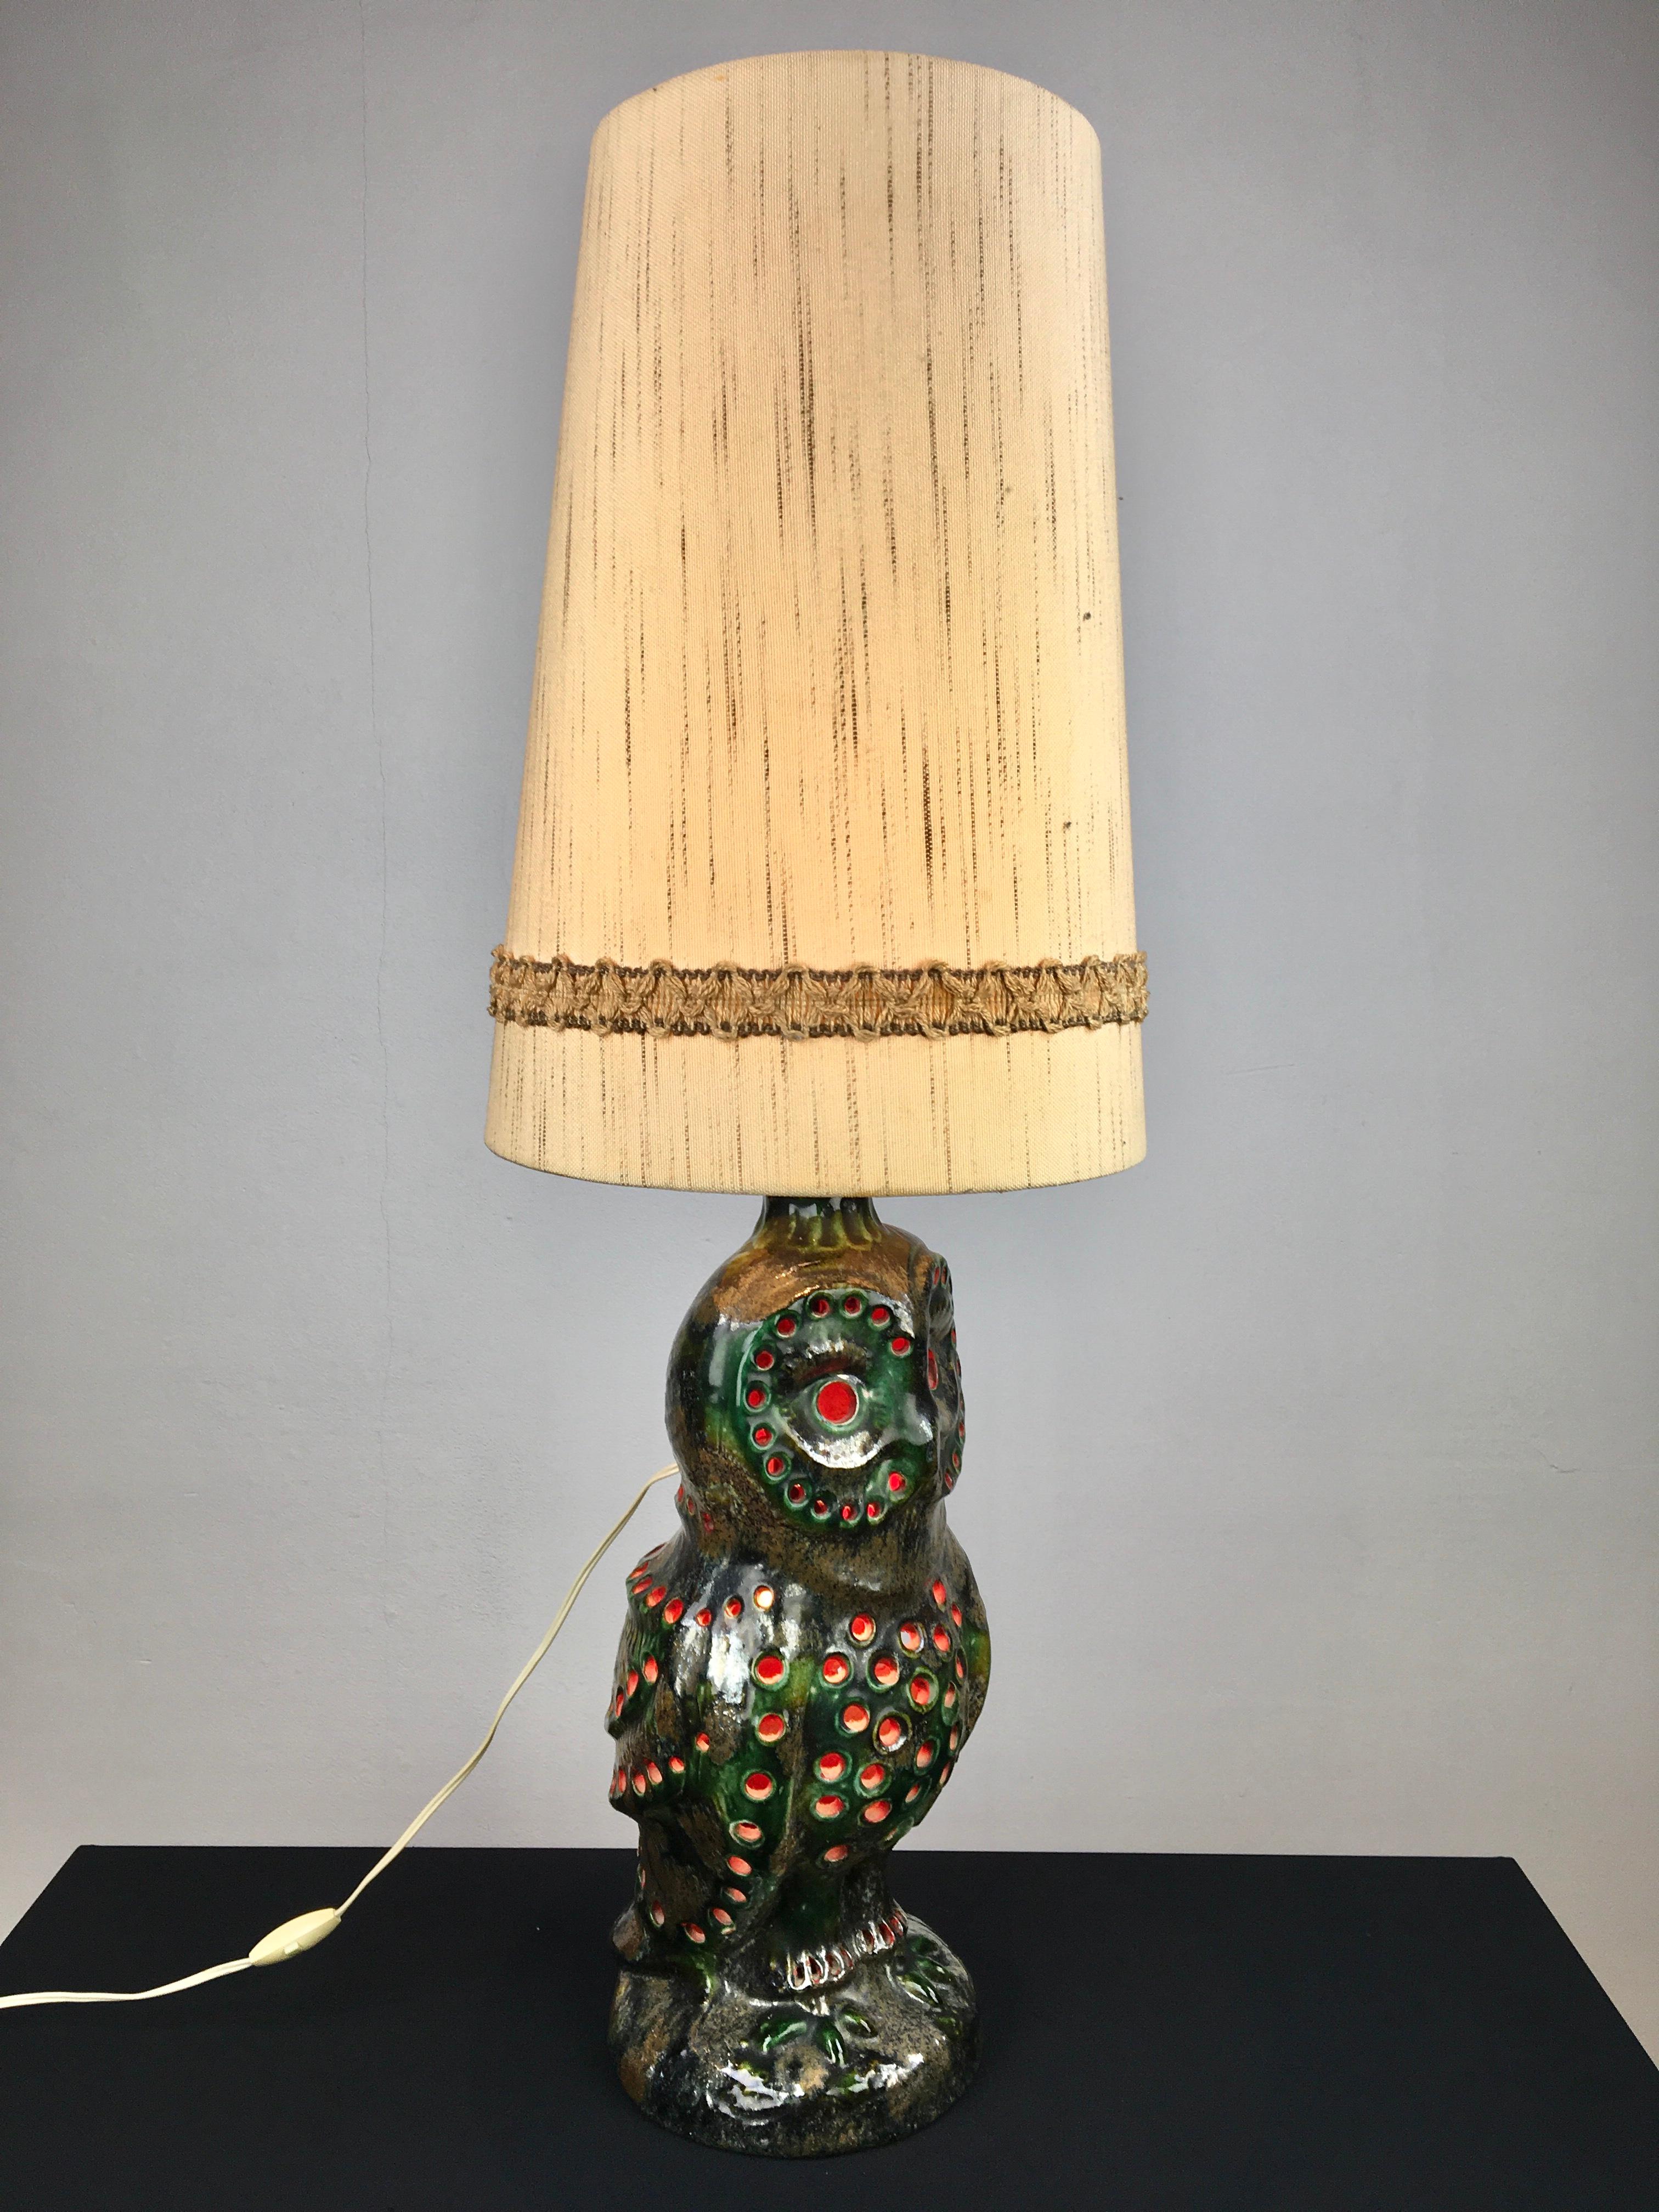 20th Century Ceramic Owl Table Lamp with Original Shade, Germany, 1970s